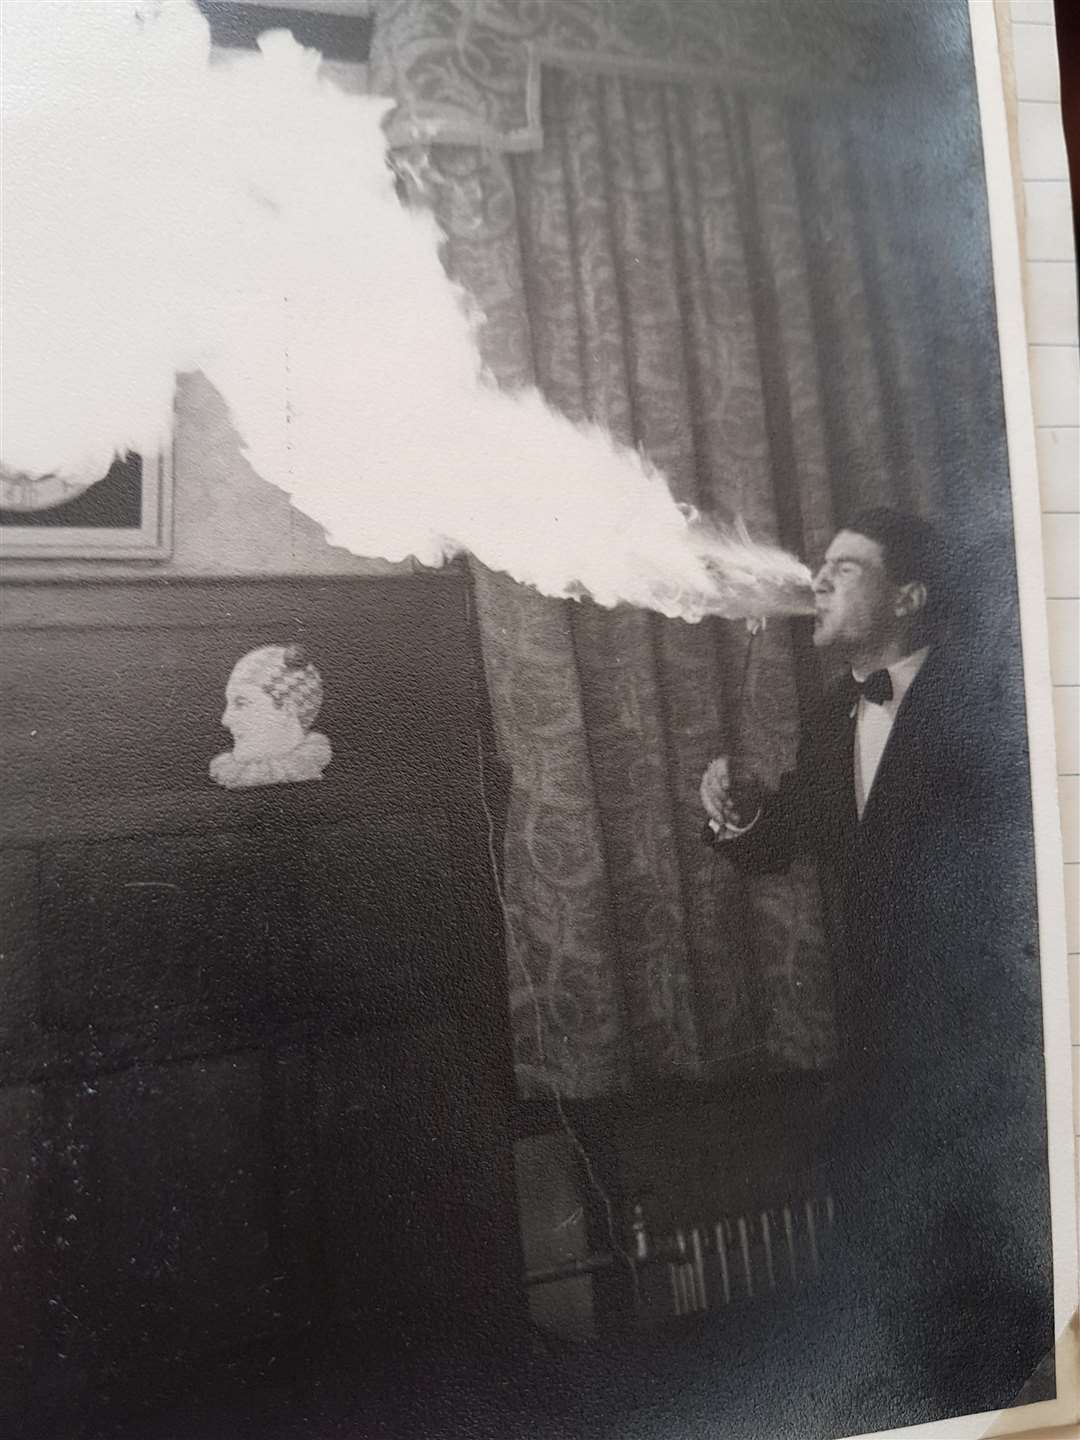 A picture of John Weaver-Smith fire-breathing